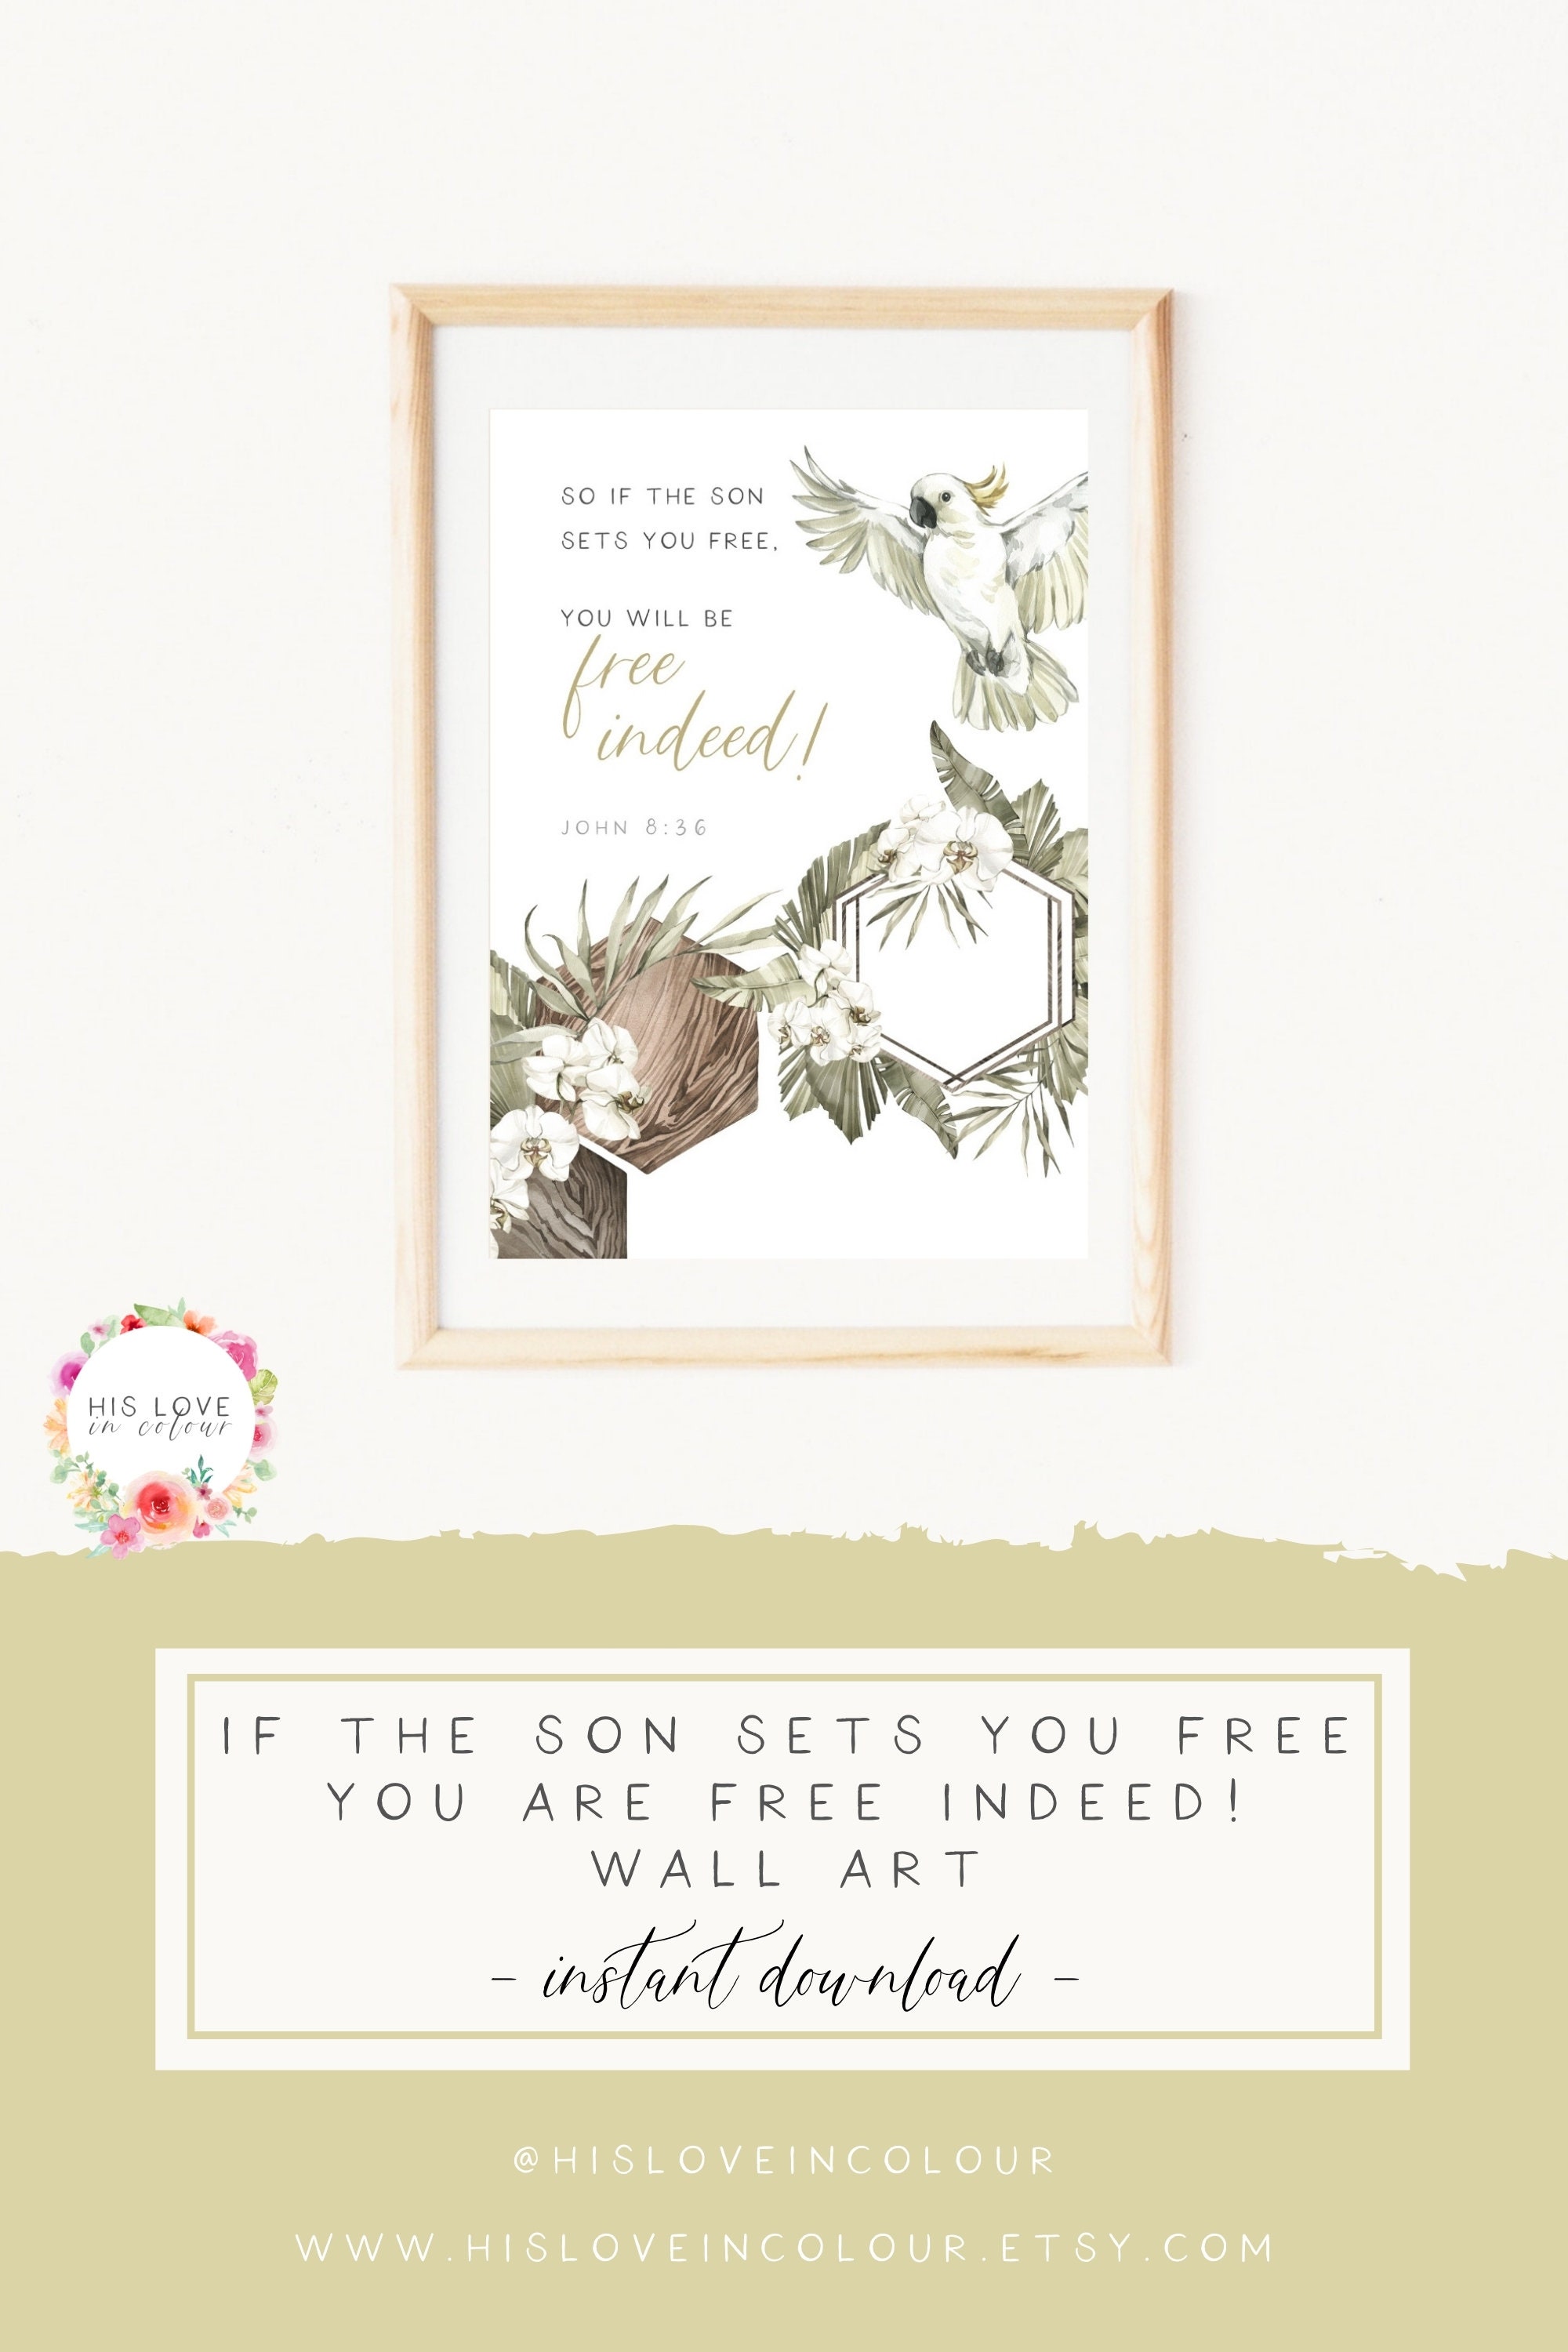 Free Indeed (John 8:36) : Faith Based Gifts Idea Poster for Sale